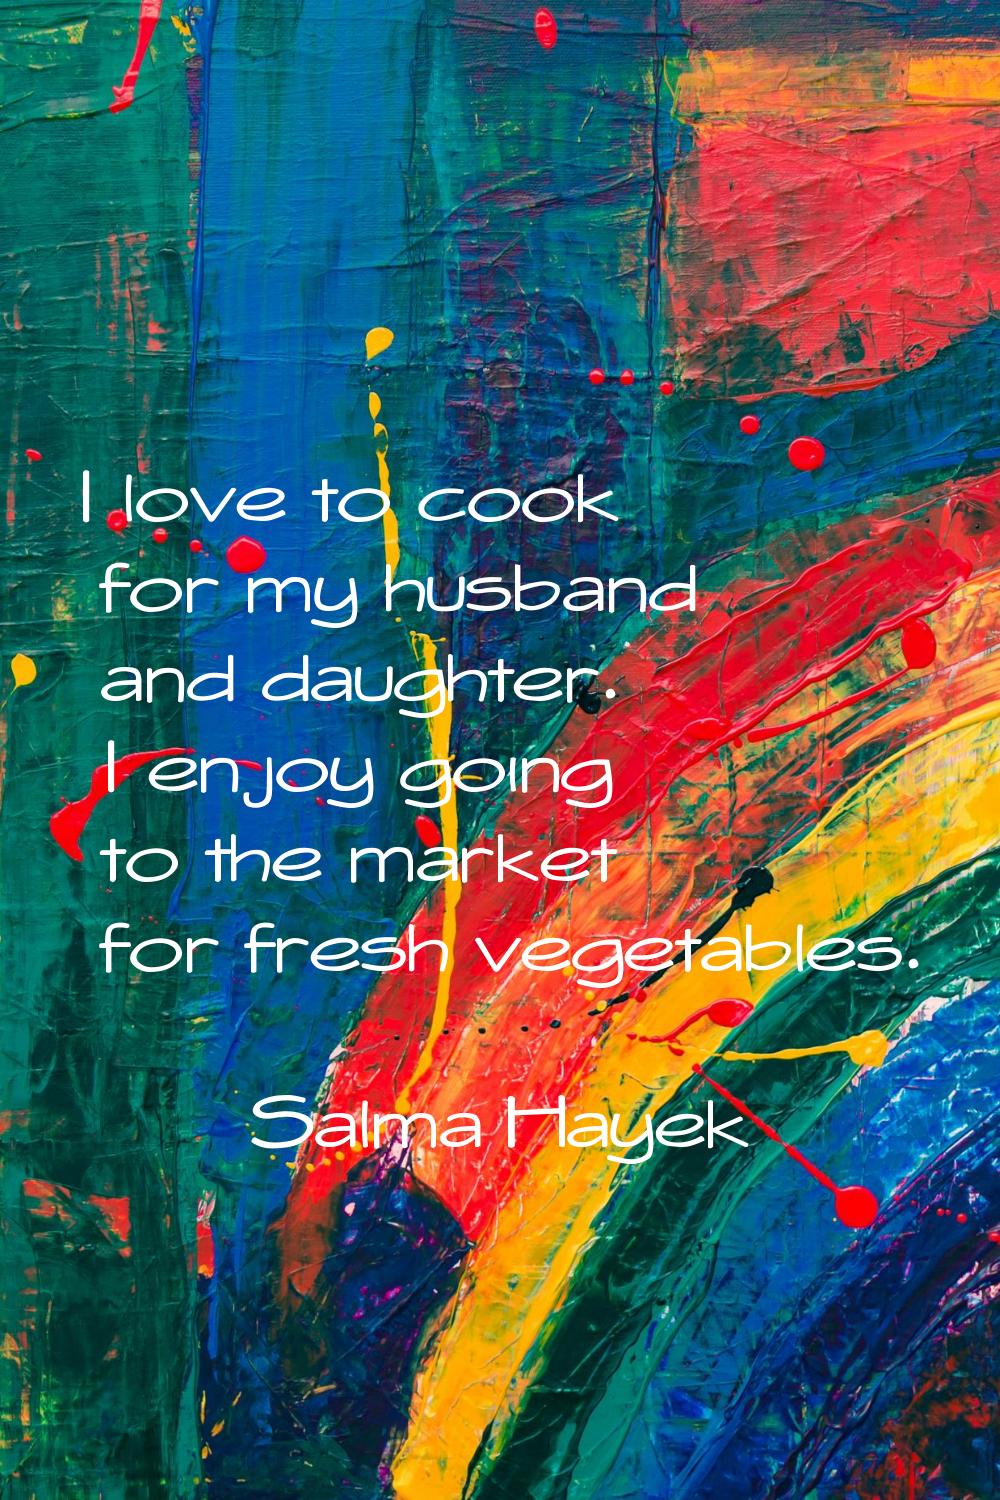 I love to cook for my husband and daughter. I enjoy going to the market for fresh vegetables.